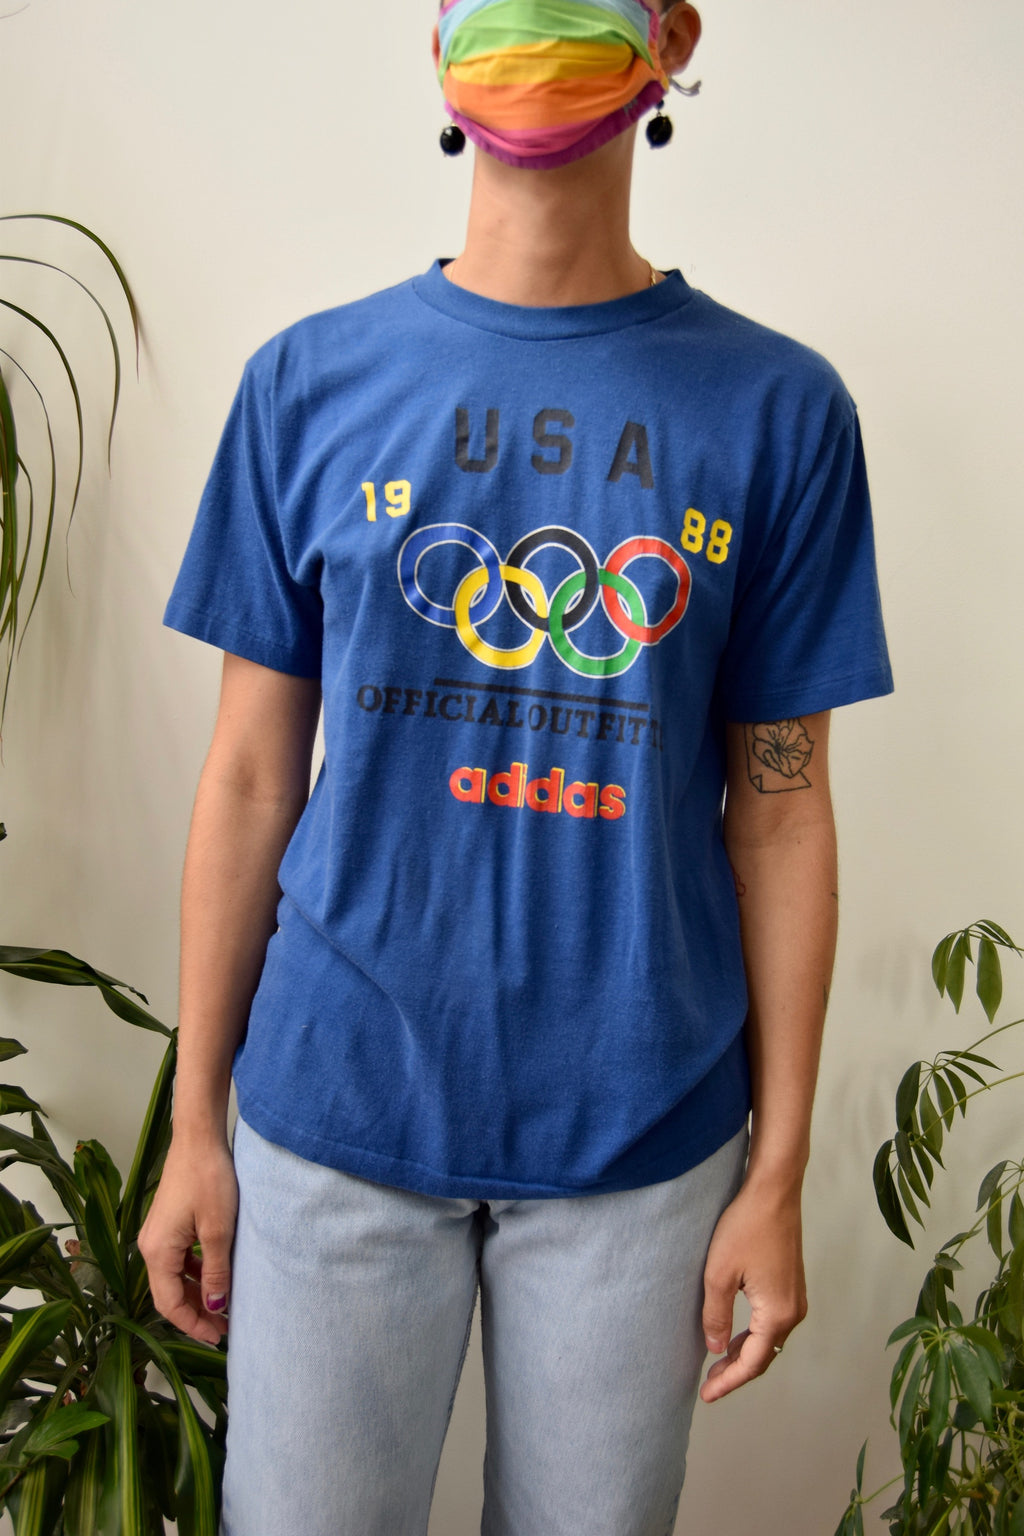 Vintage 1988 USA Adidas Olympic Outfitters T-Shirt